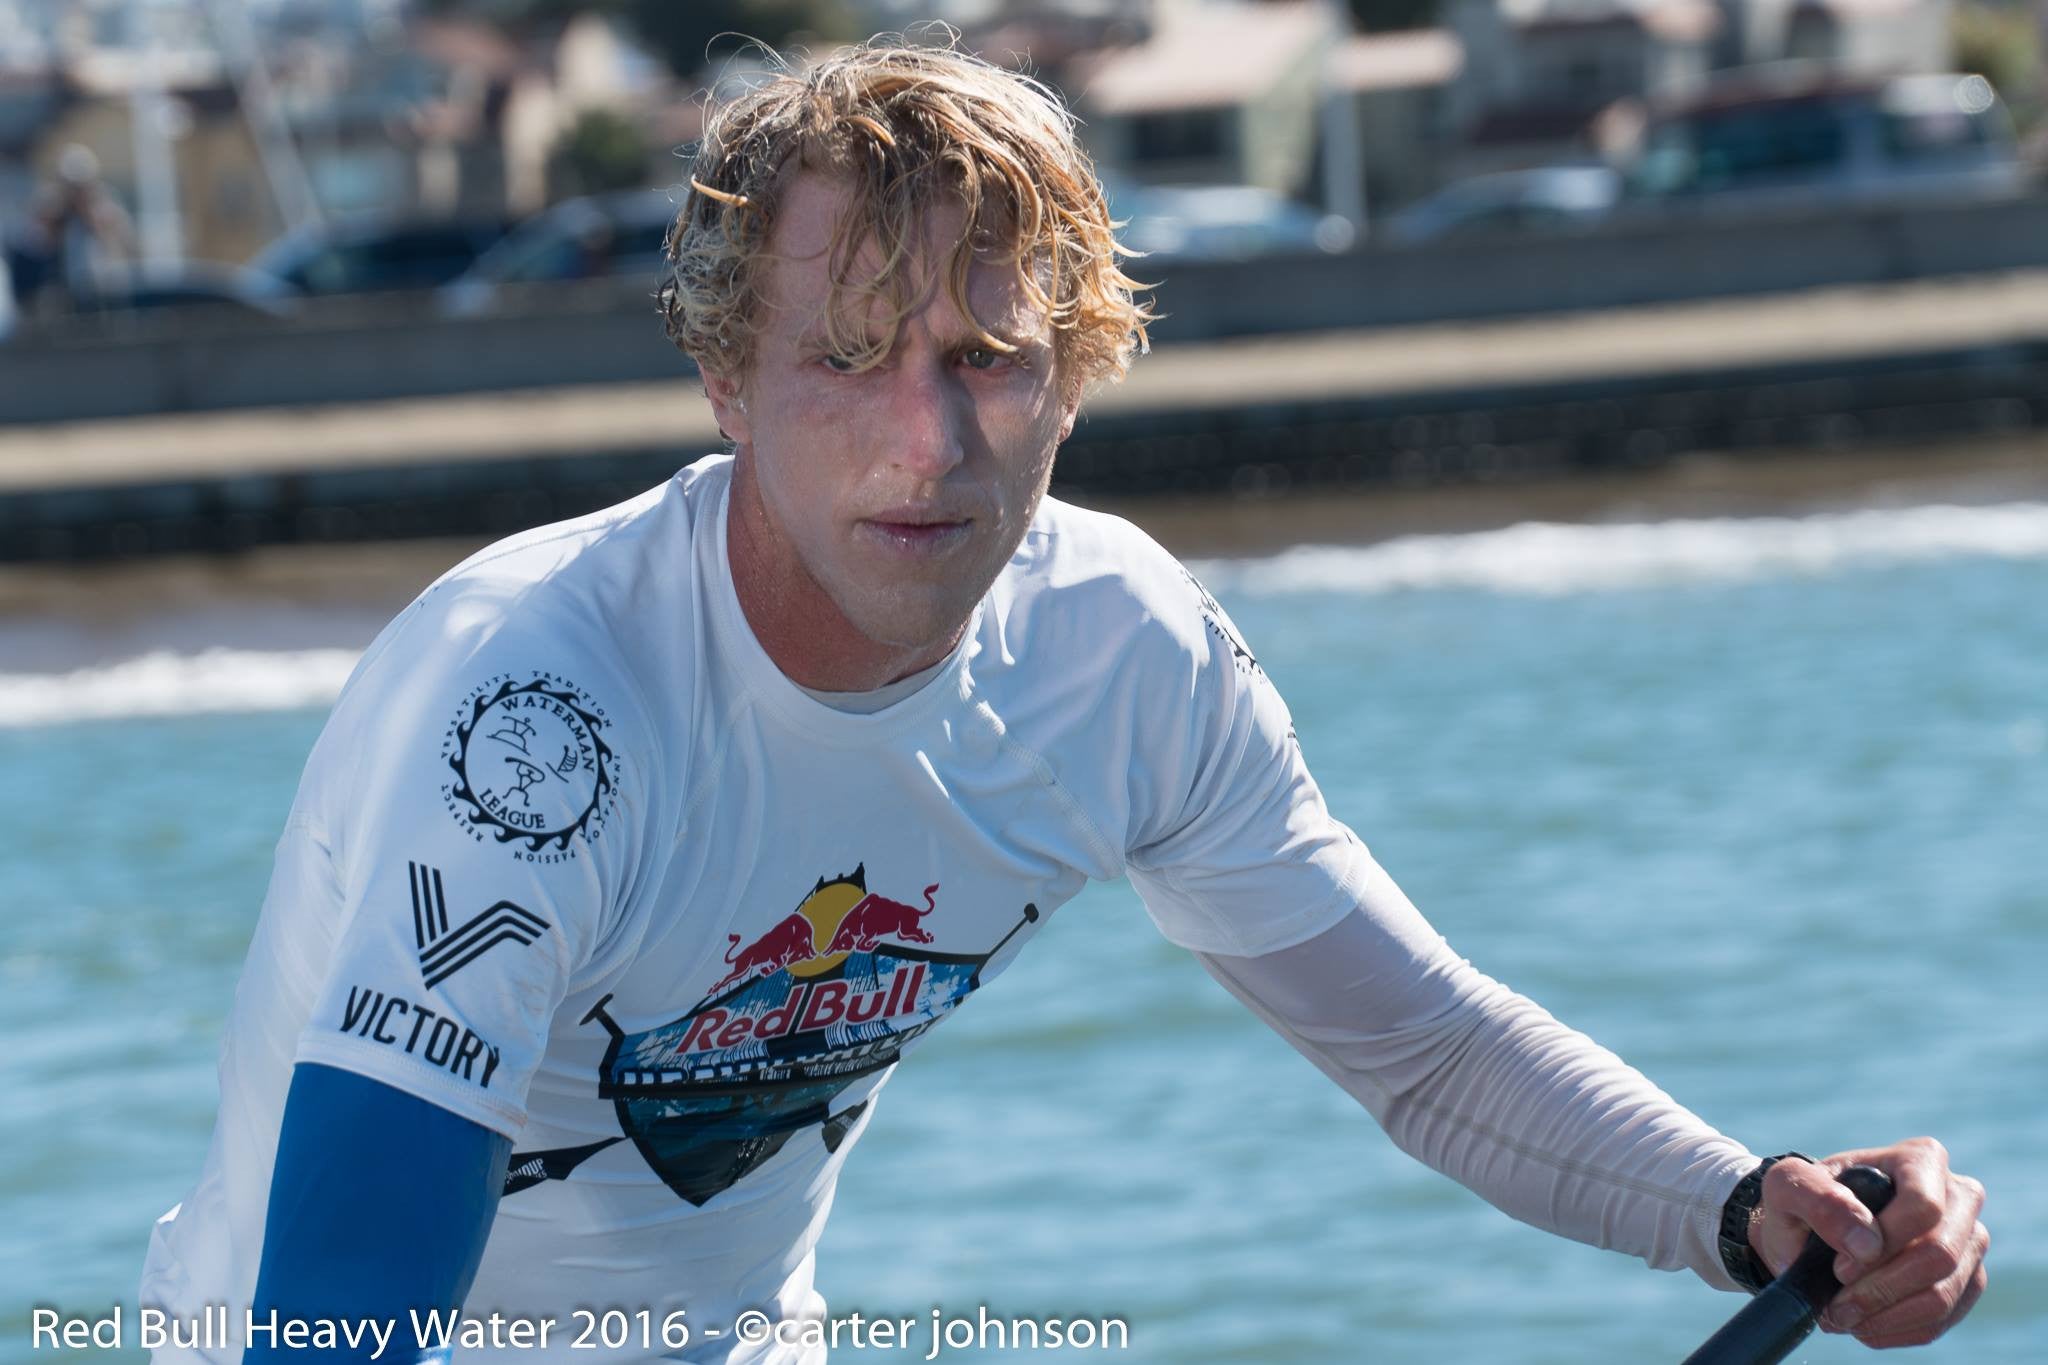 Connor Baxter in Red Bull Heavy Water